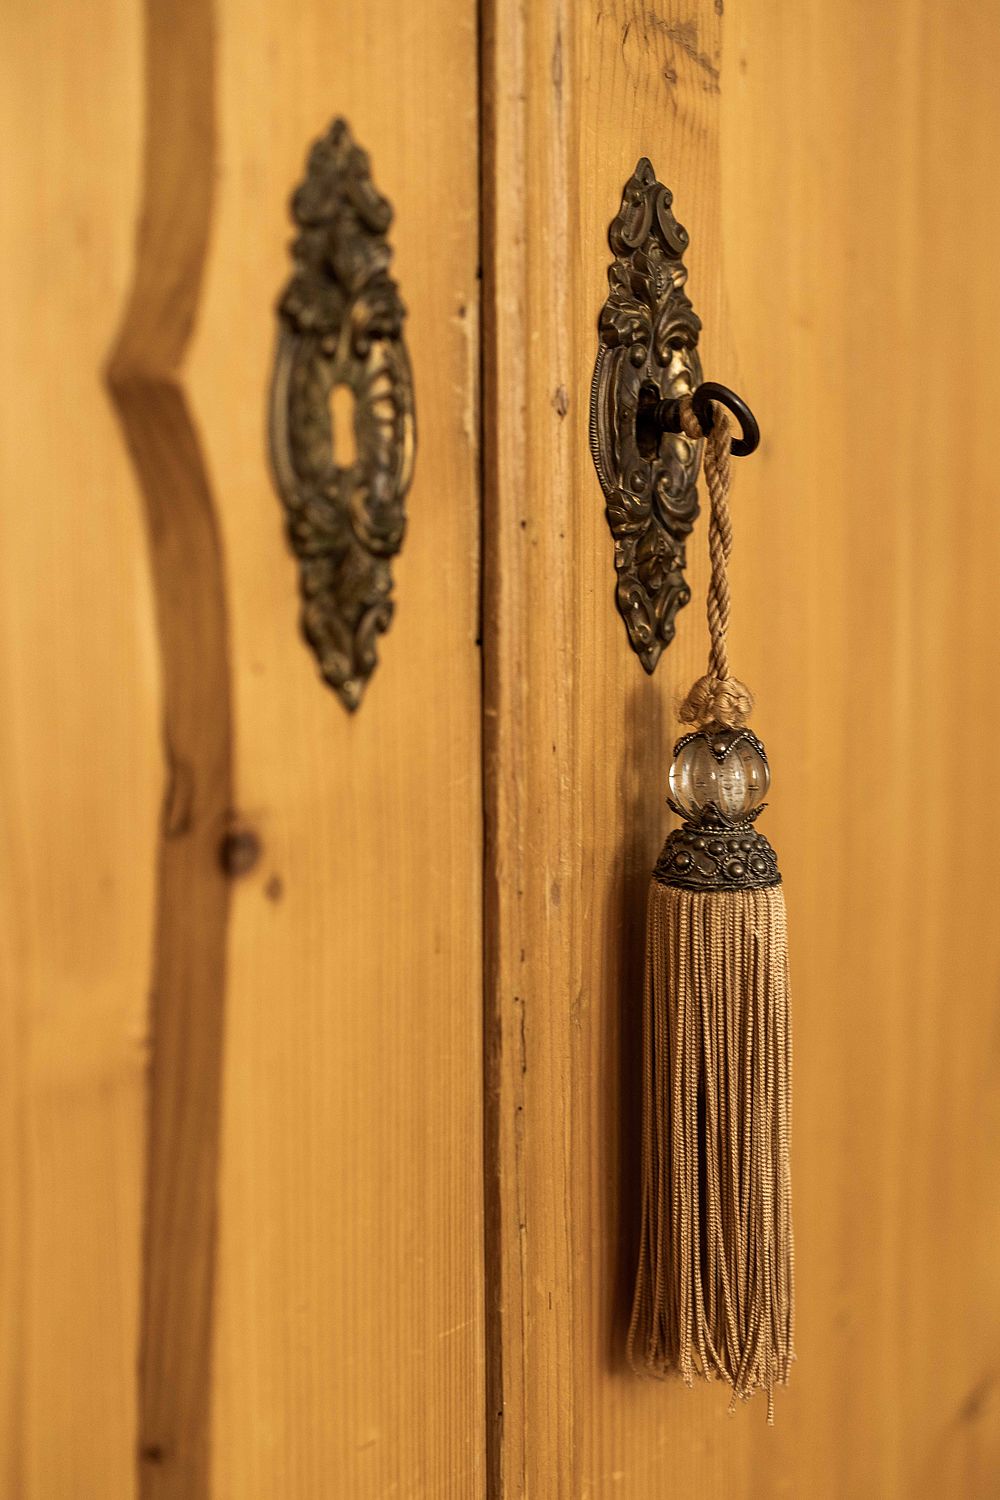 Antique key in the lock of a country style wardrobe